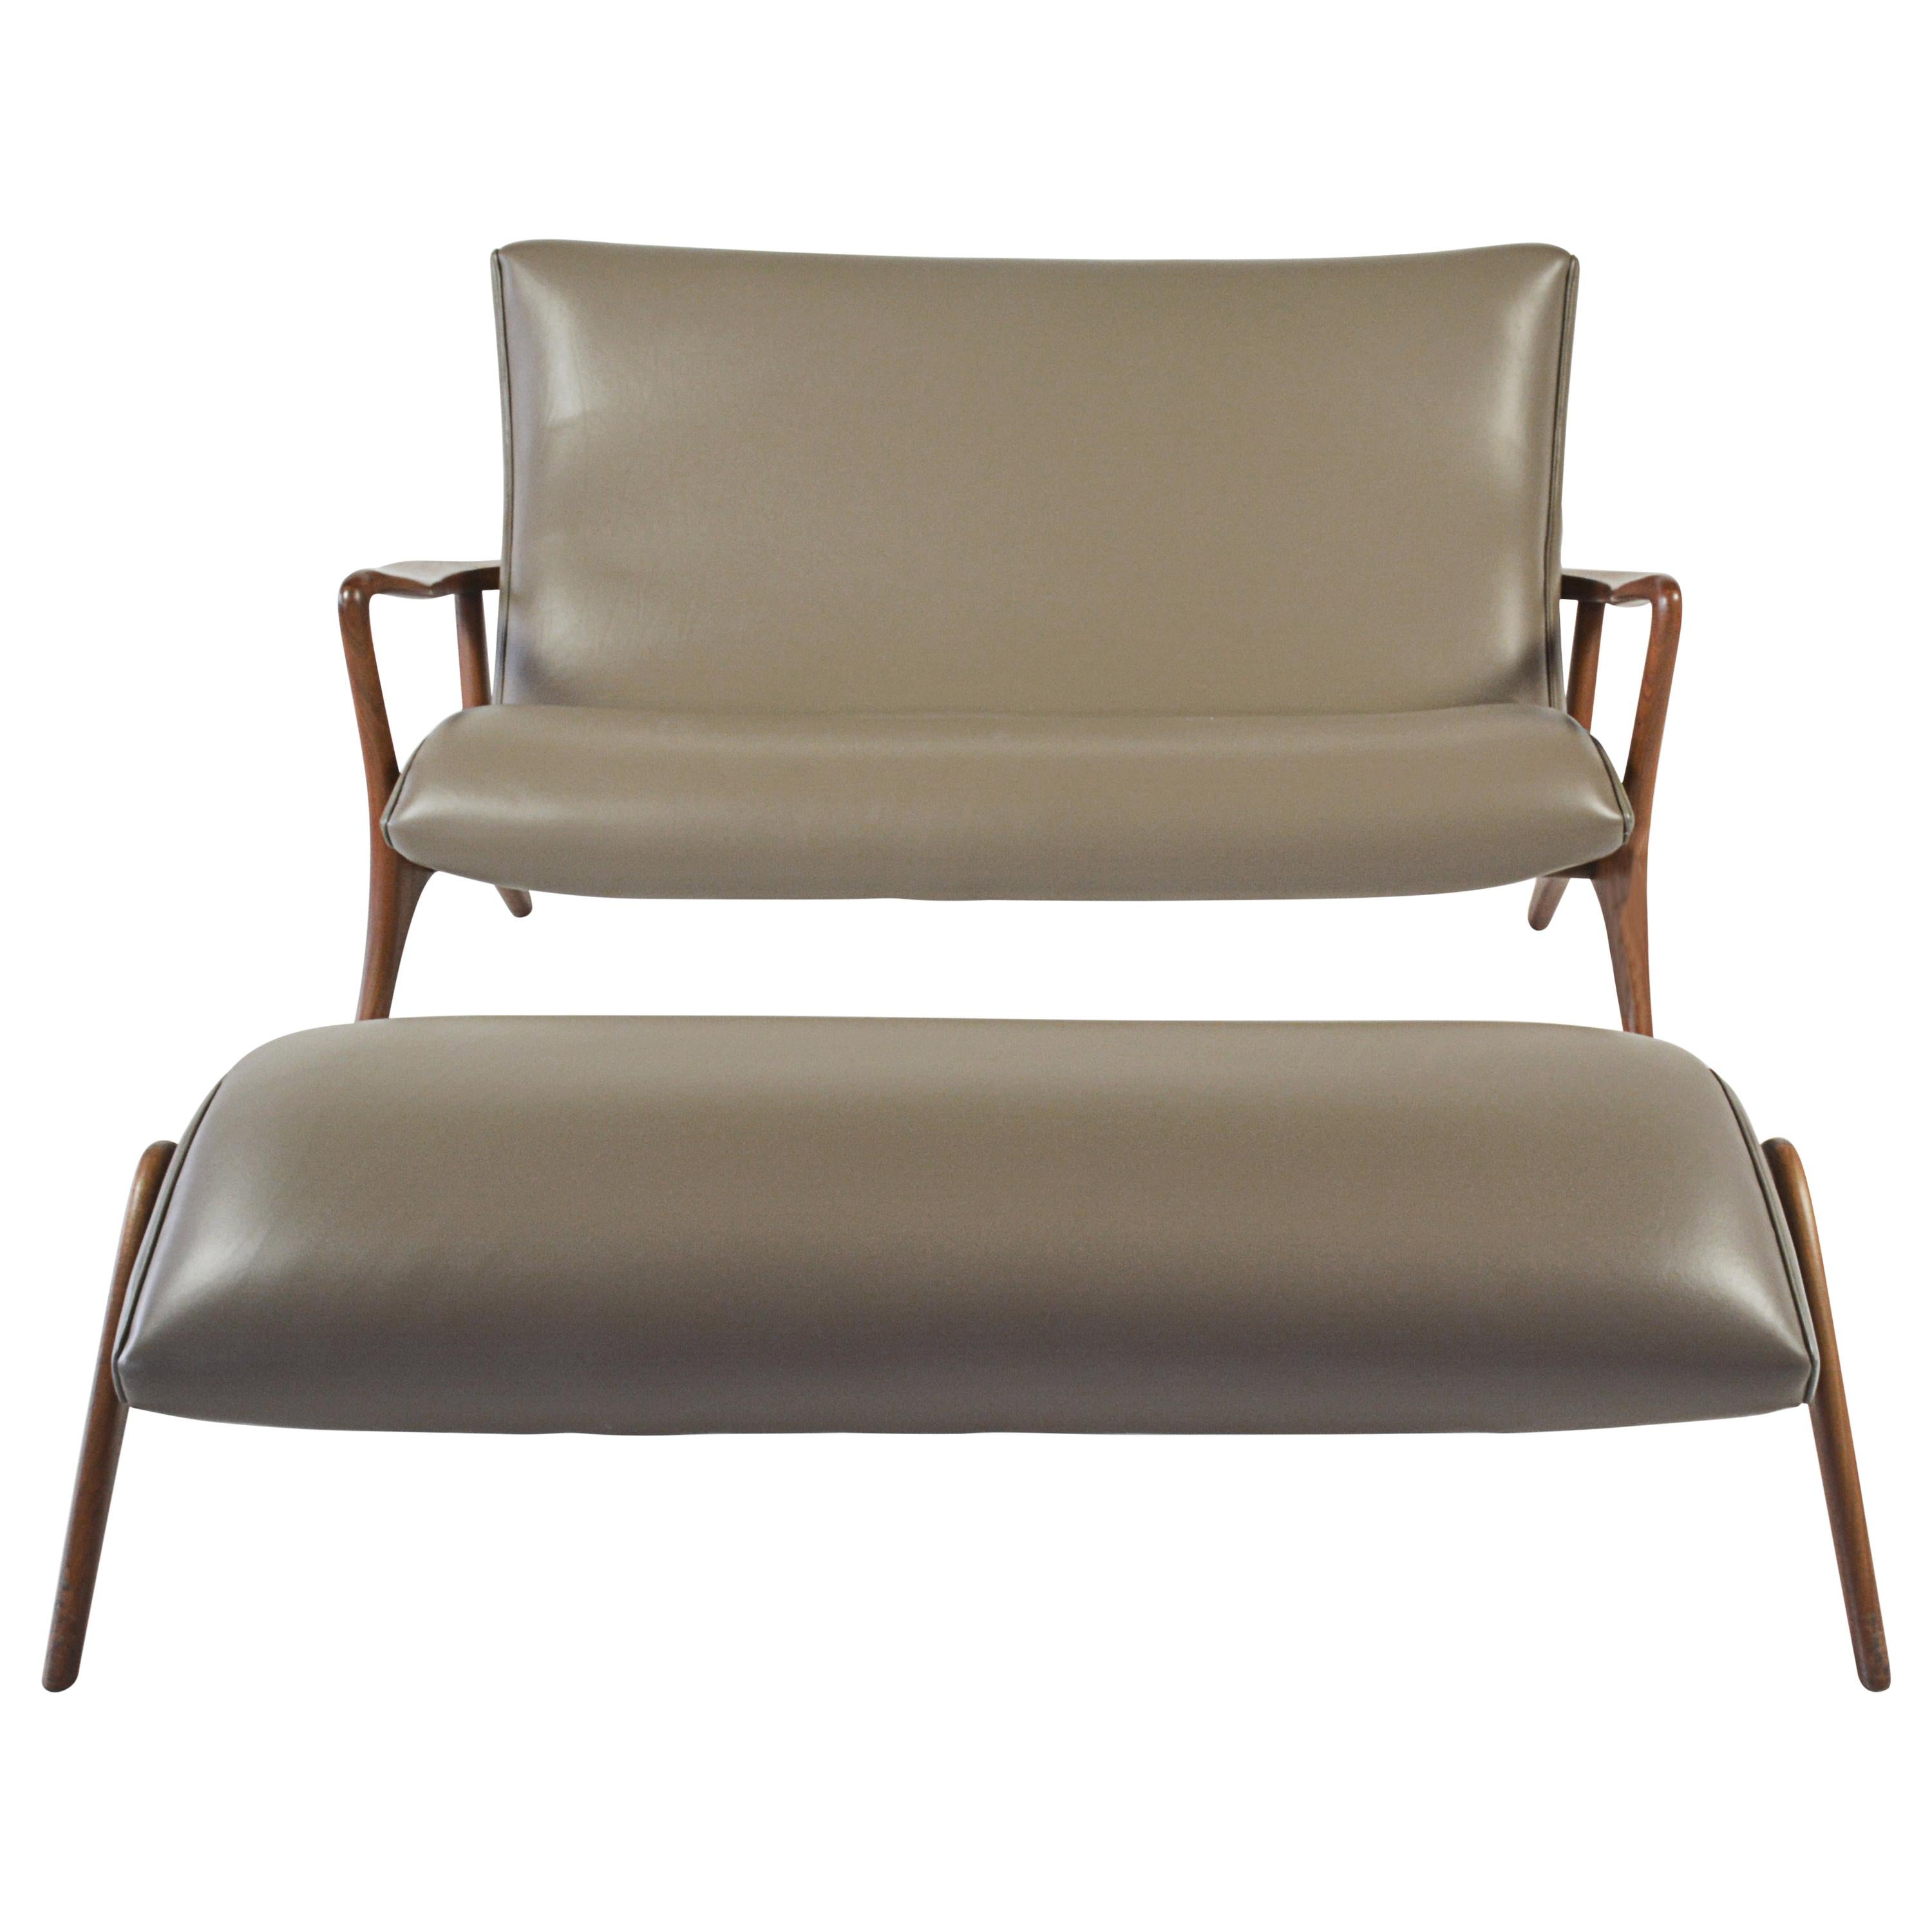 Vladimir Kagan Contour Loveseat and Footstool in Tan Leather with Natural Walnut